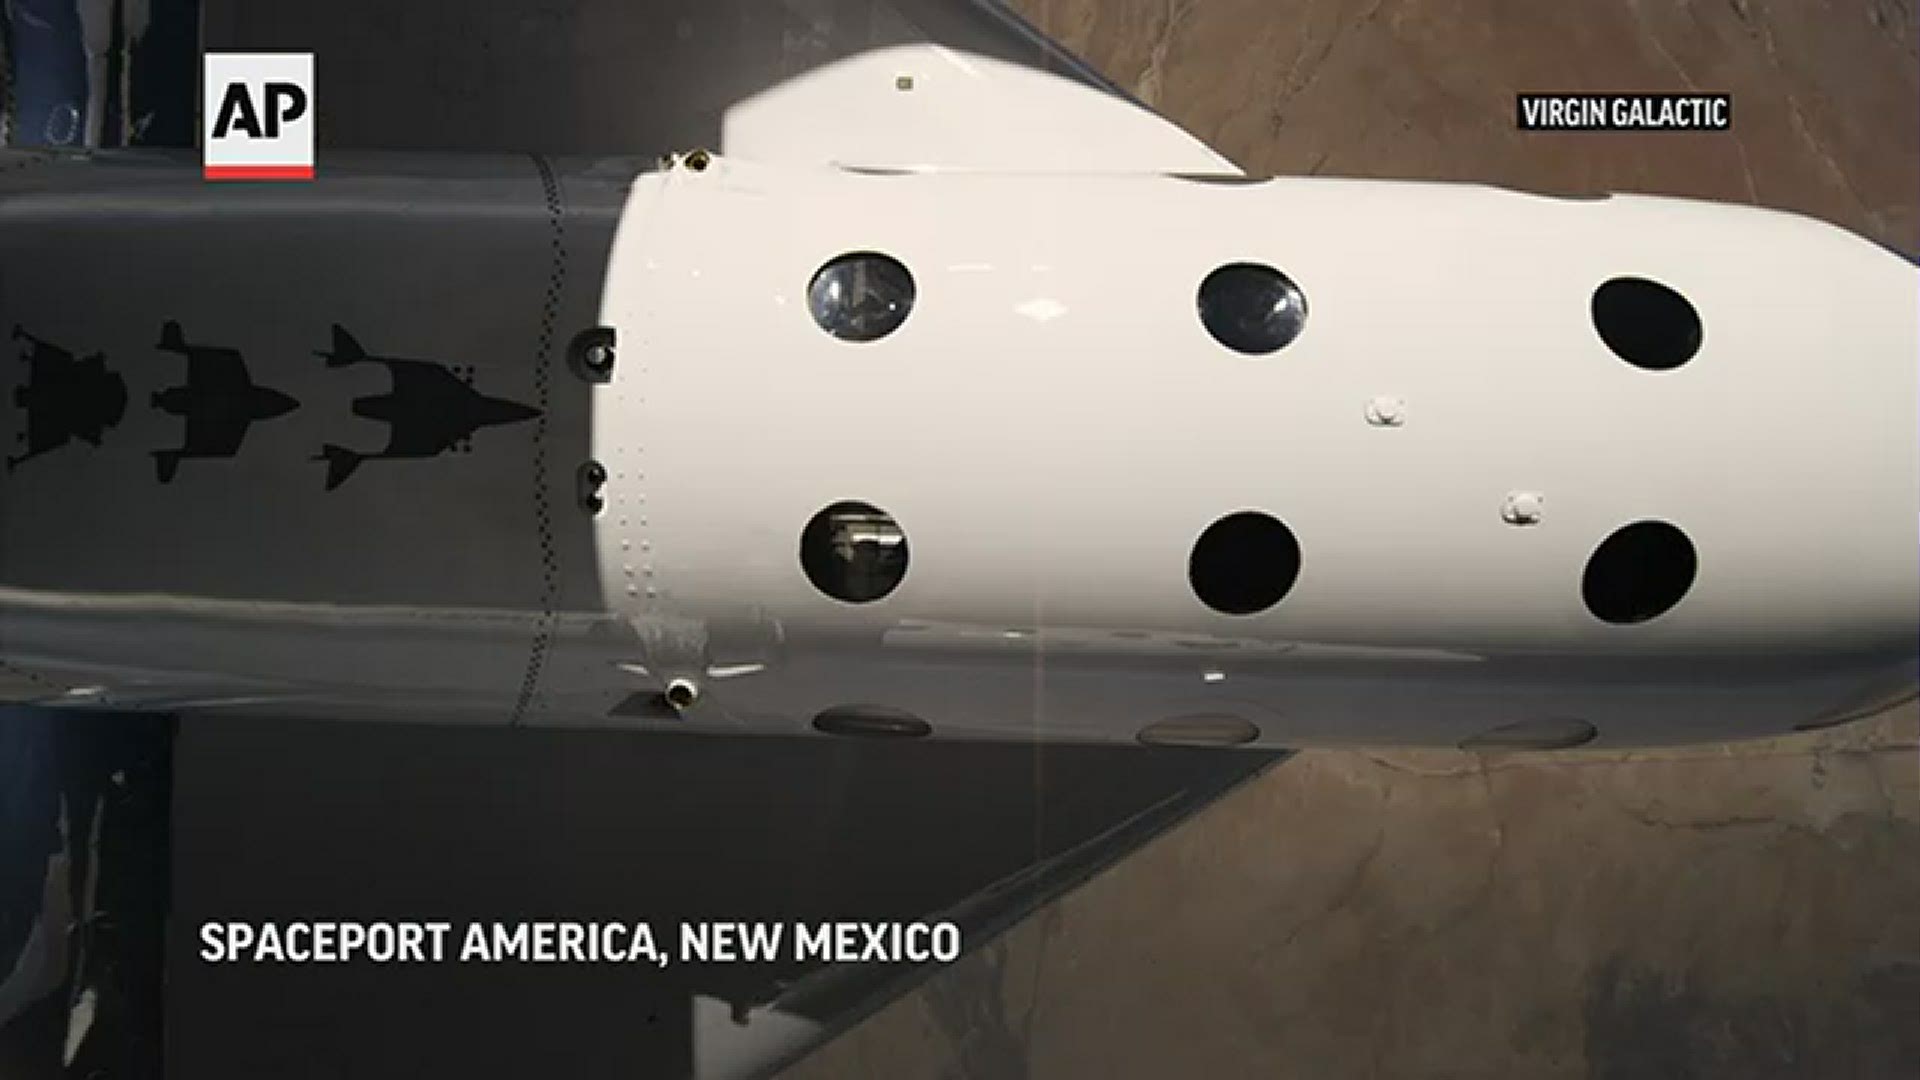 Virgin Galactic made its first rocket-powered flight from New Mexico to the fringes of space in a manned shuttle.